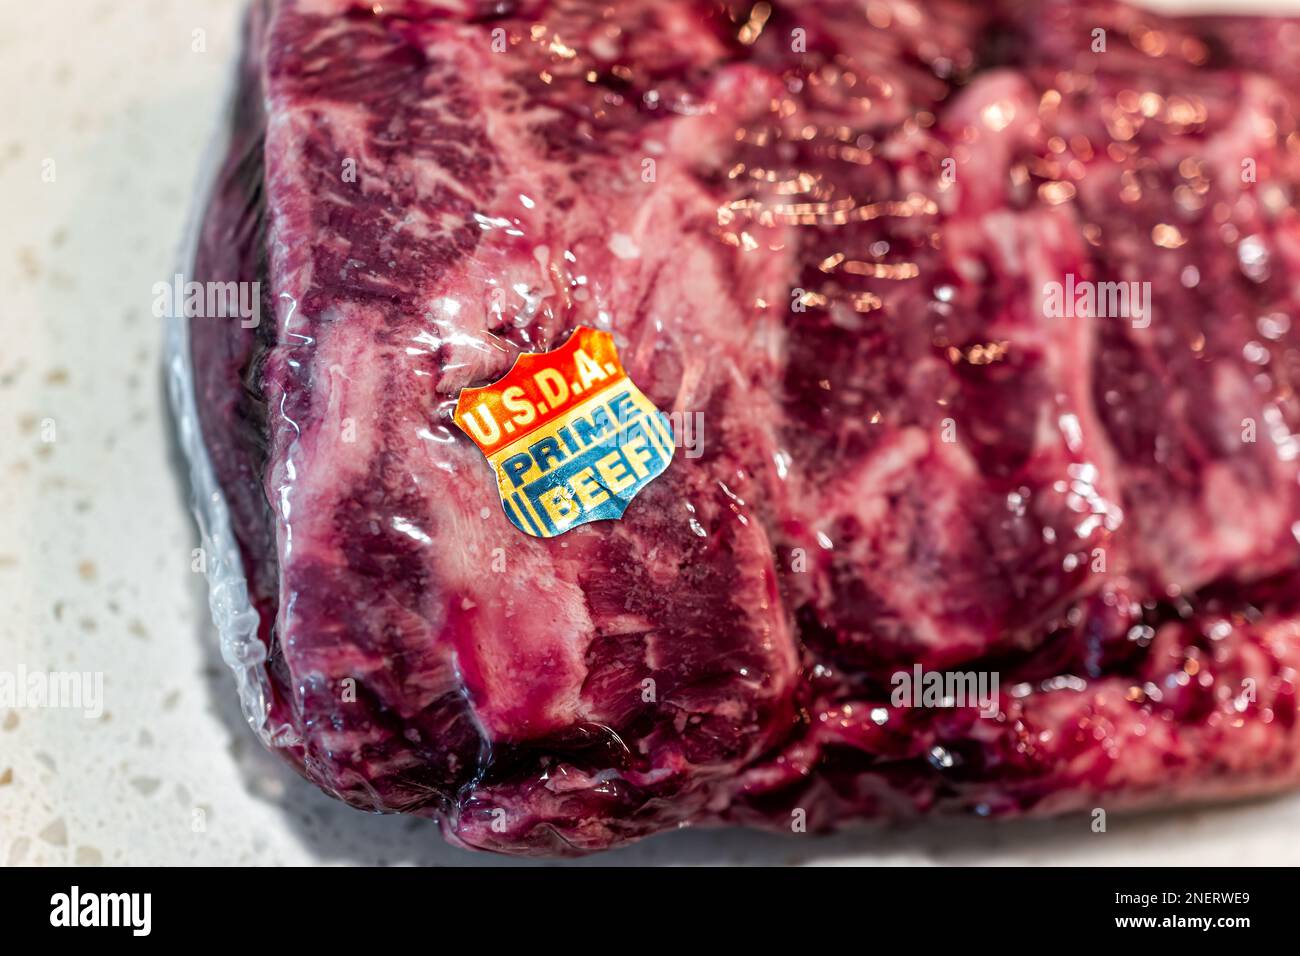 Naples, USA - May 11, 2022: Prime USDA beef sticker on whole packaged roast New York strip red meat steak by Costco bulk brand Stock Photo